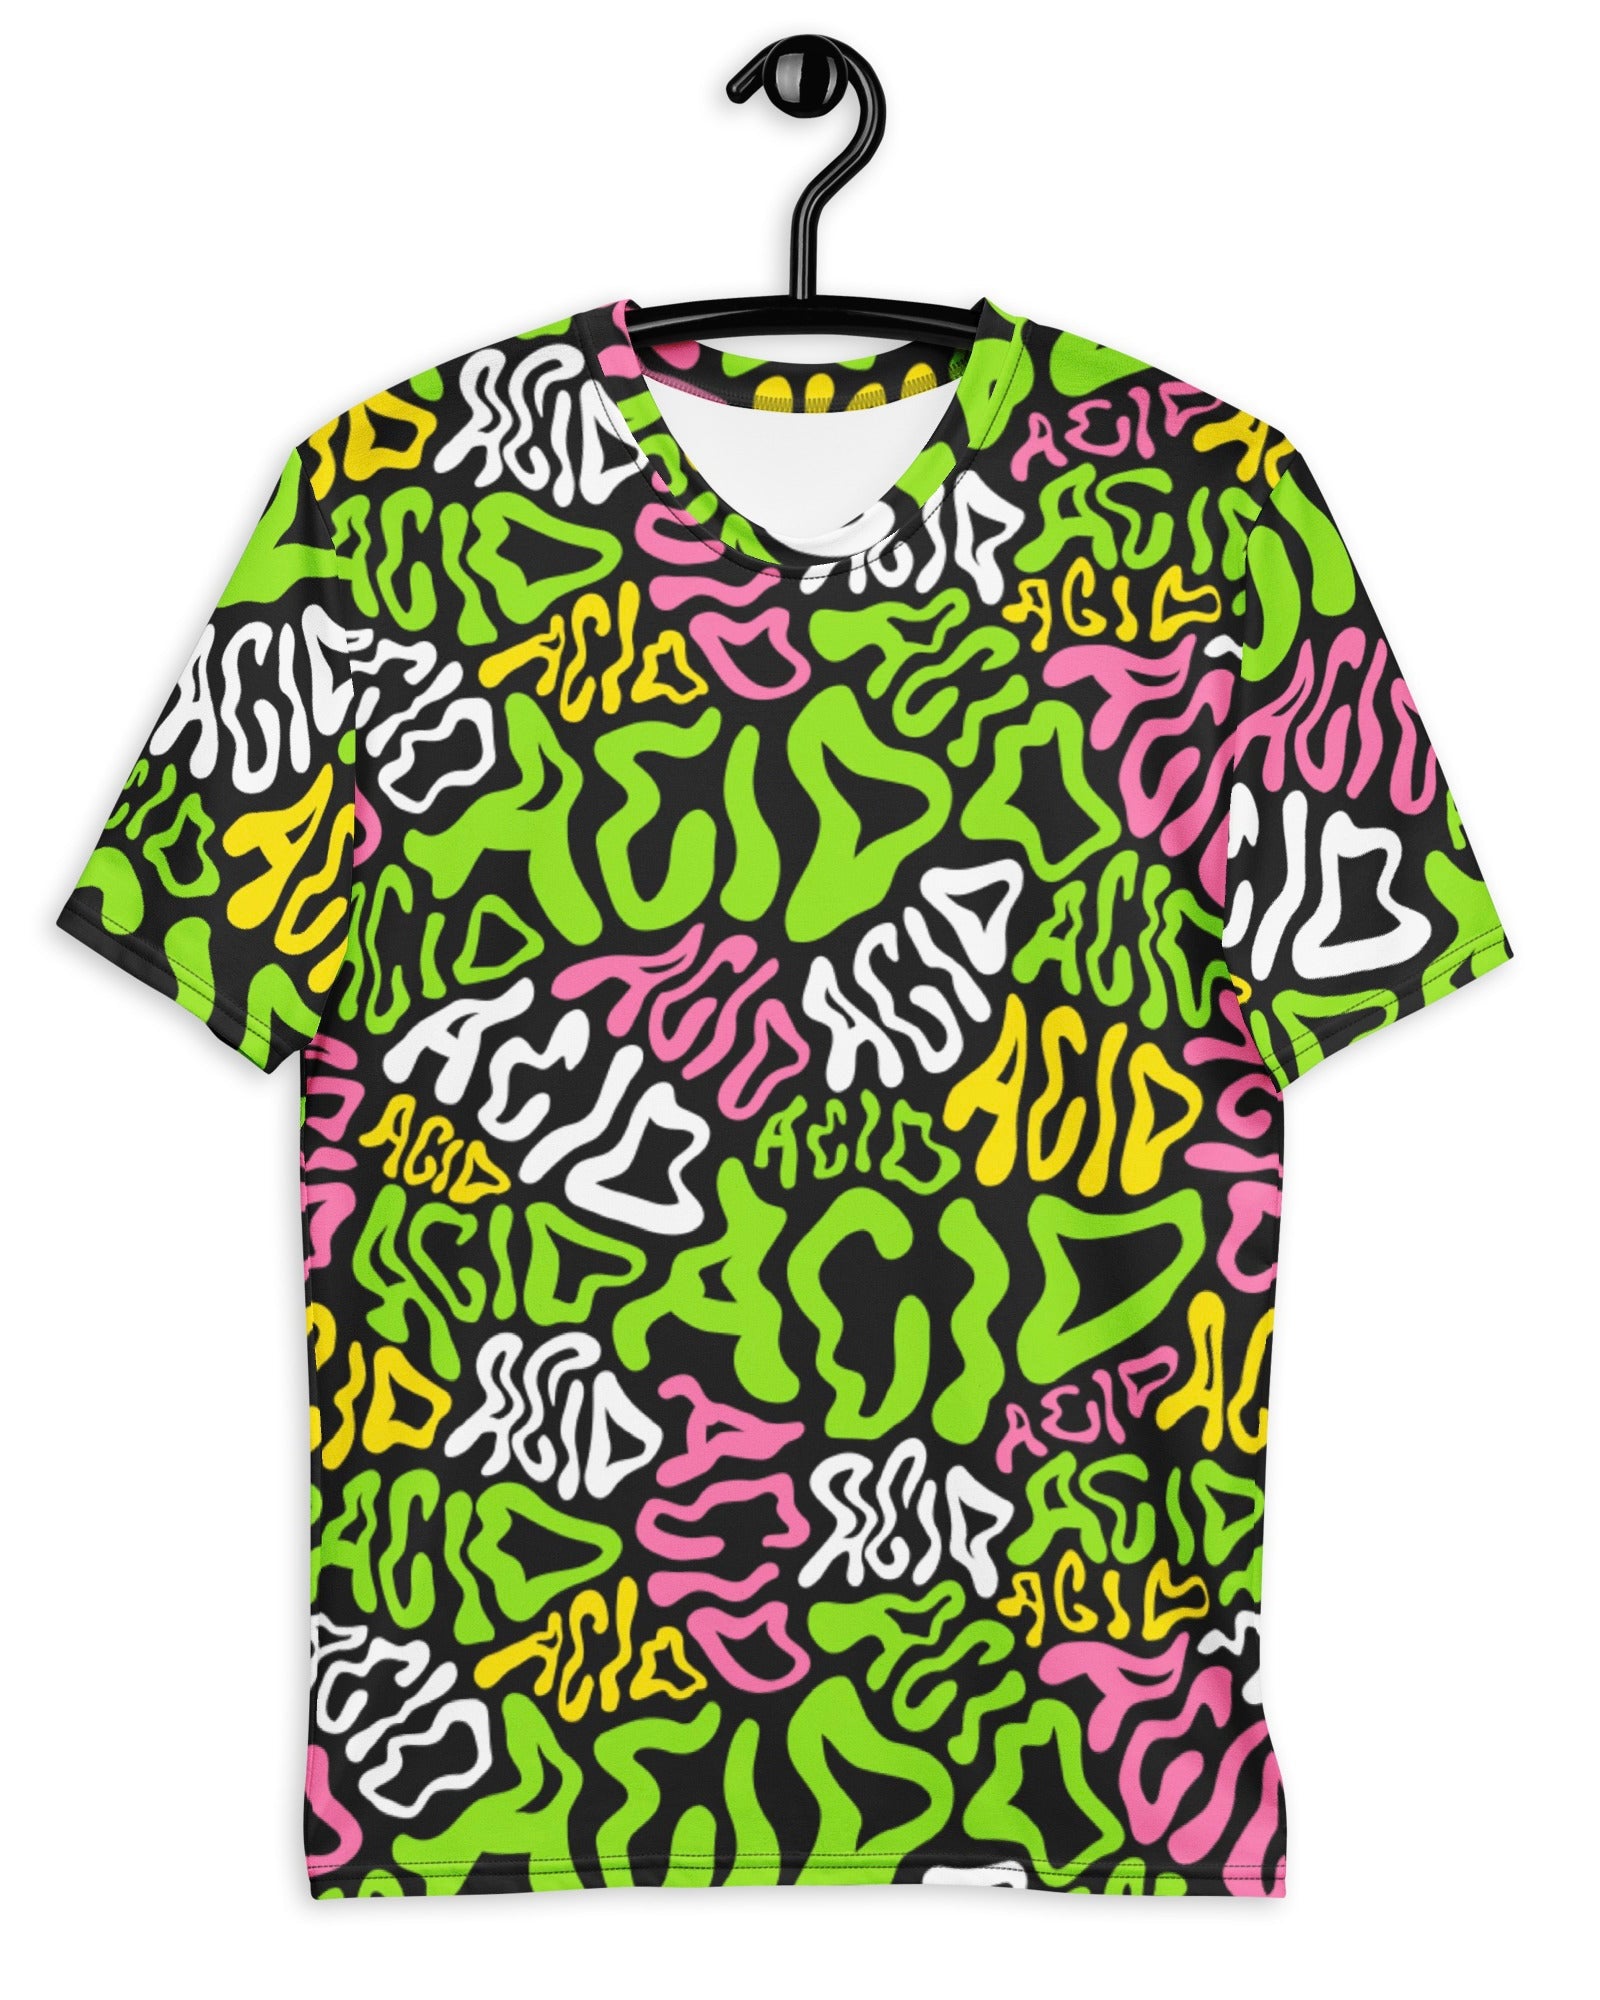 Candy Acid T-Shirt, T-Shirt, - One Stop Rave